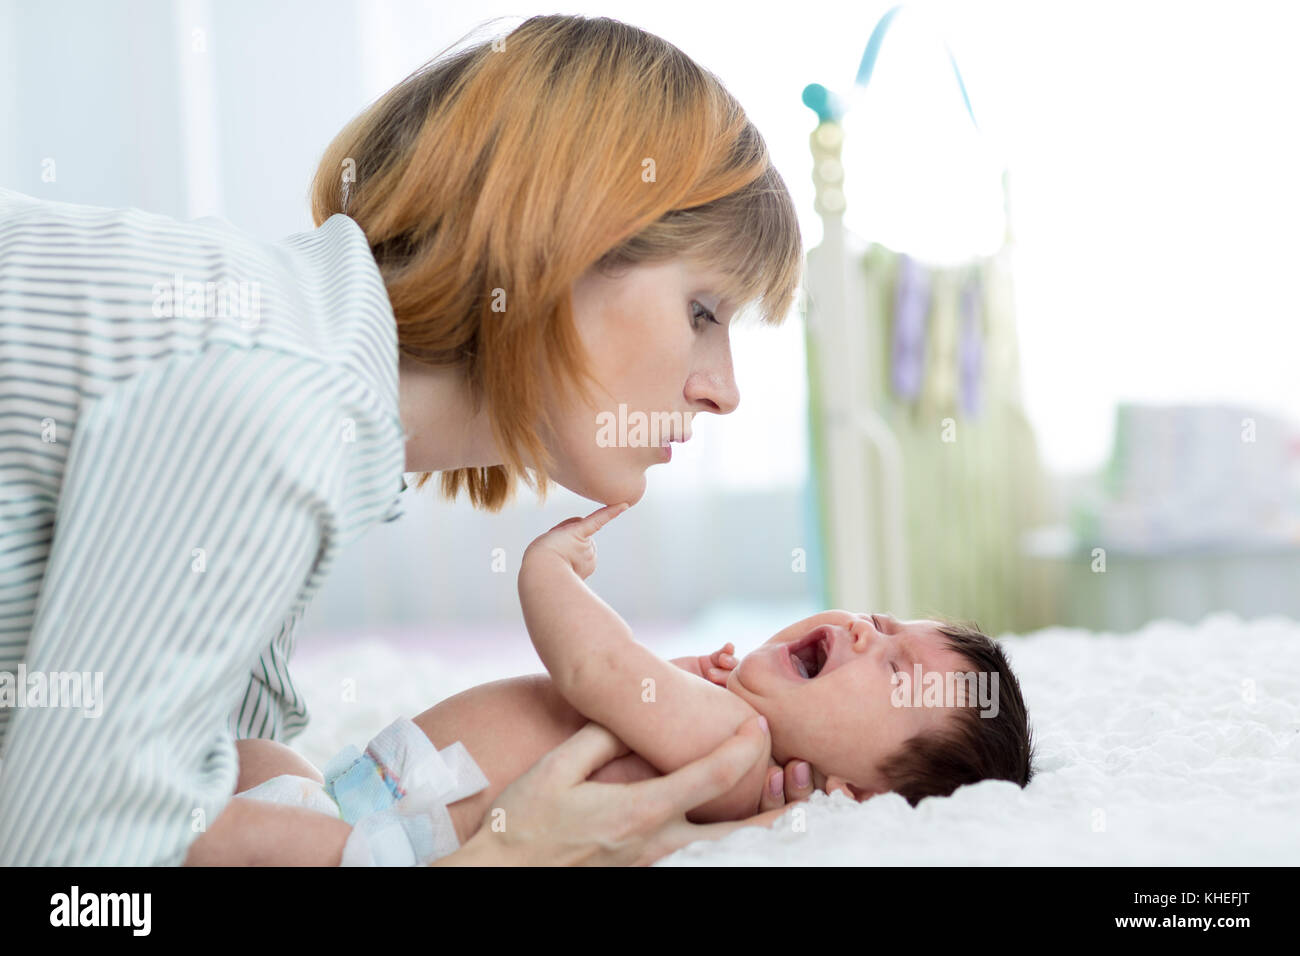 Mother comforts her crying newborn baby at home Stock Photo